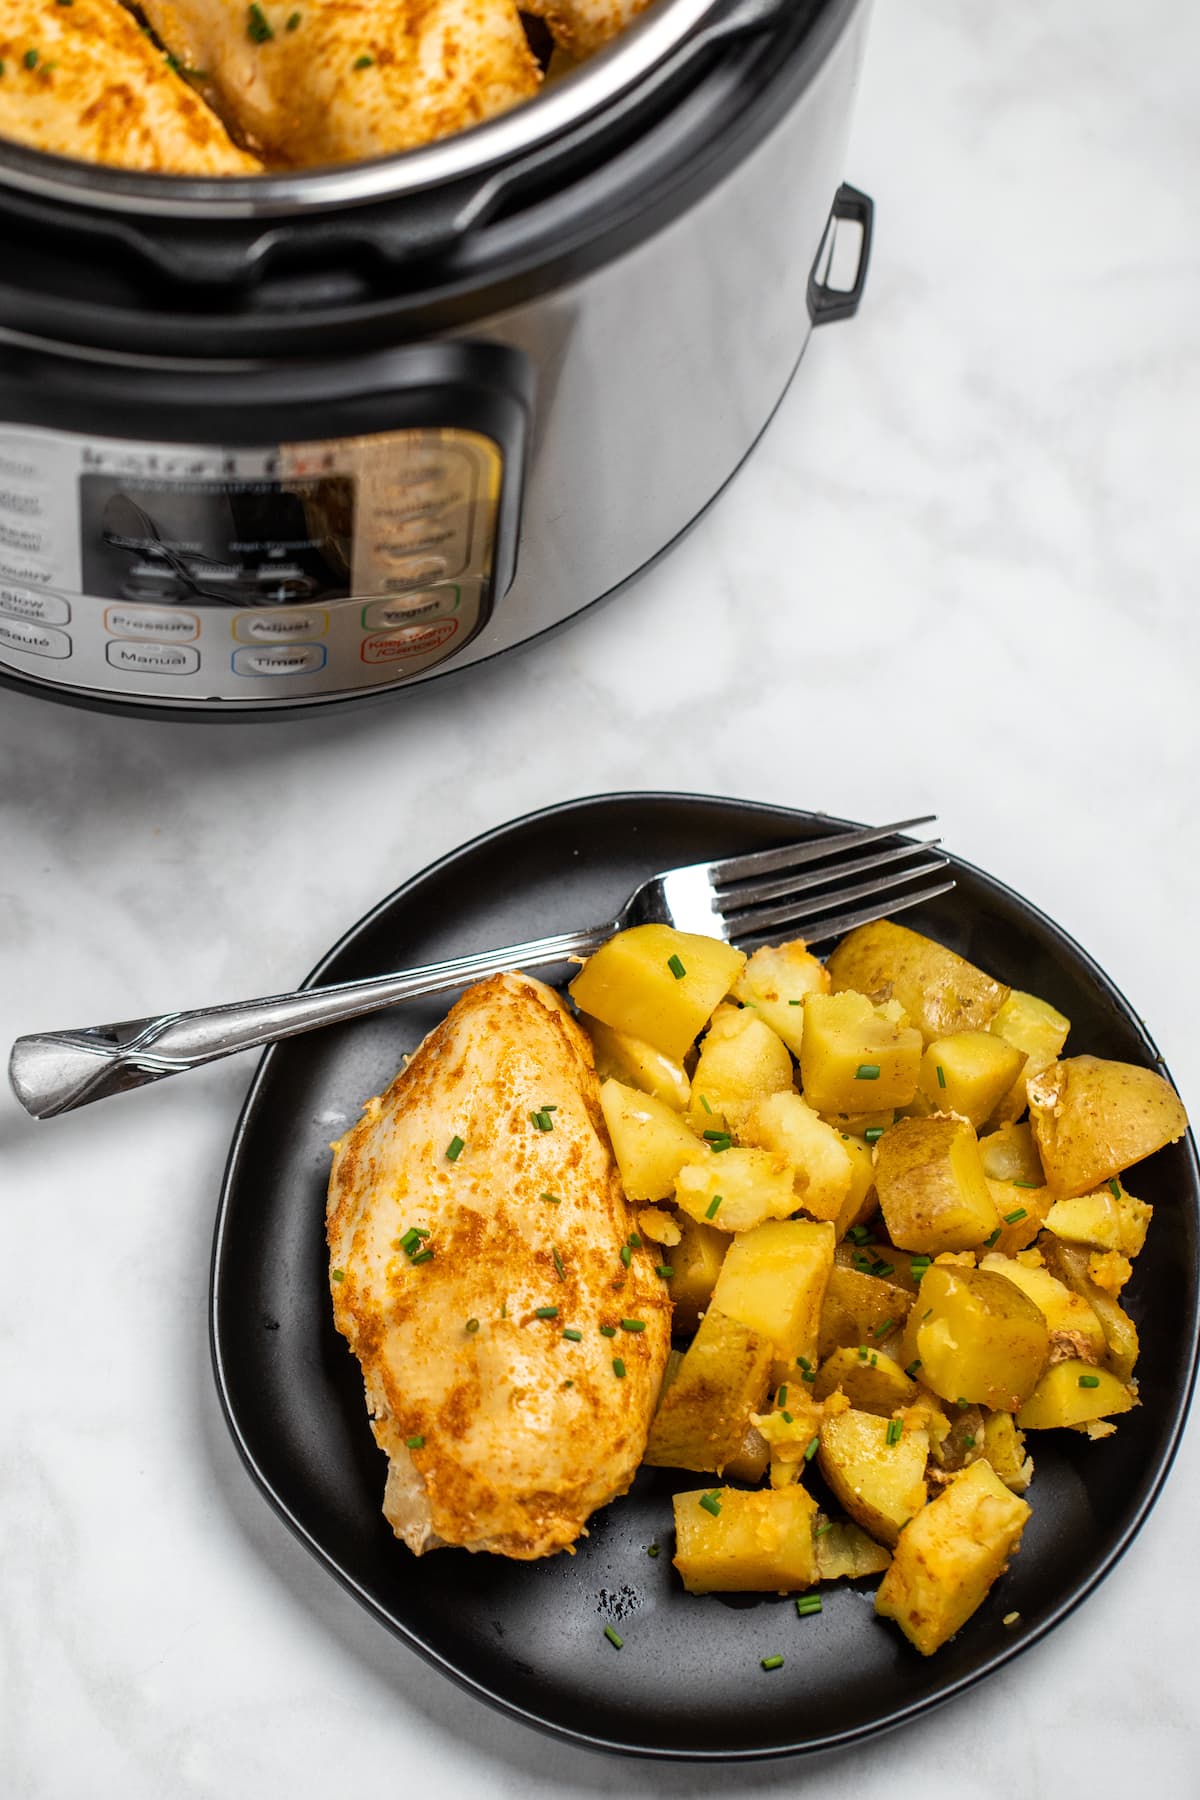 A plate with chicken and potatoes in front of an instant pot.